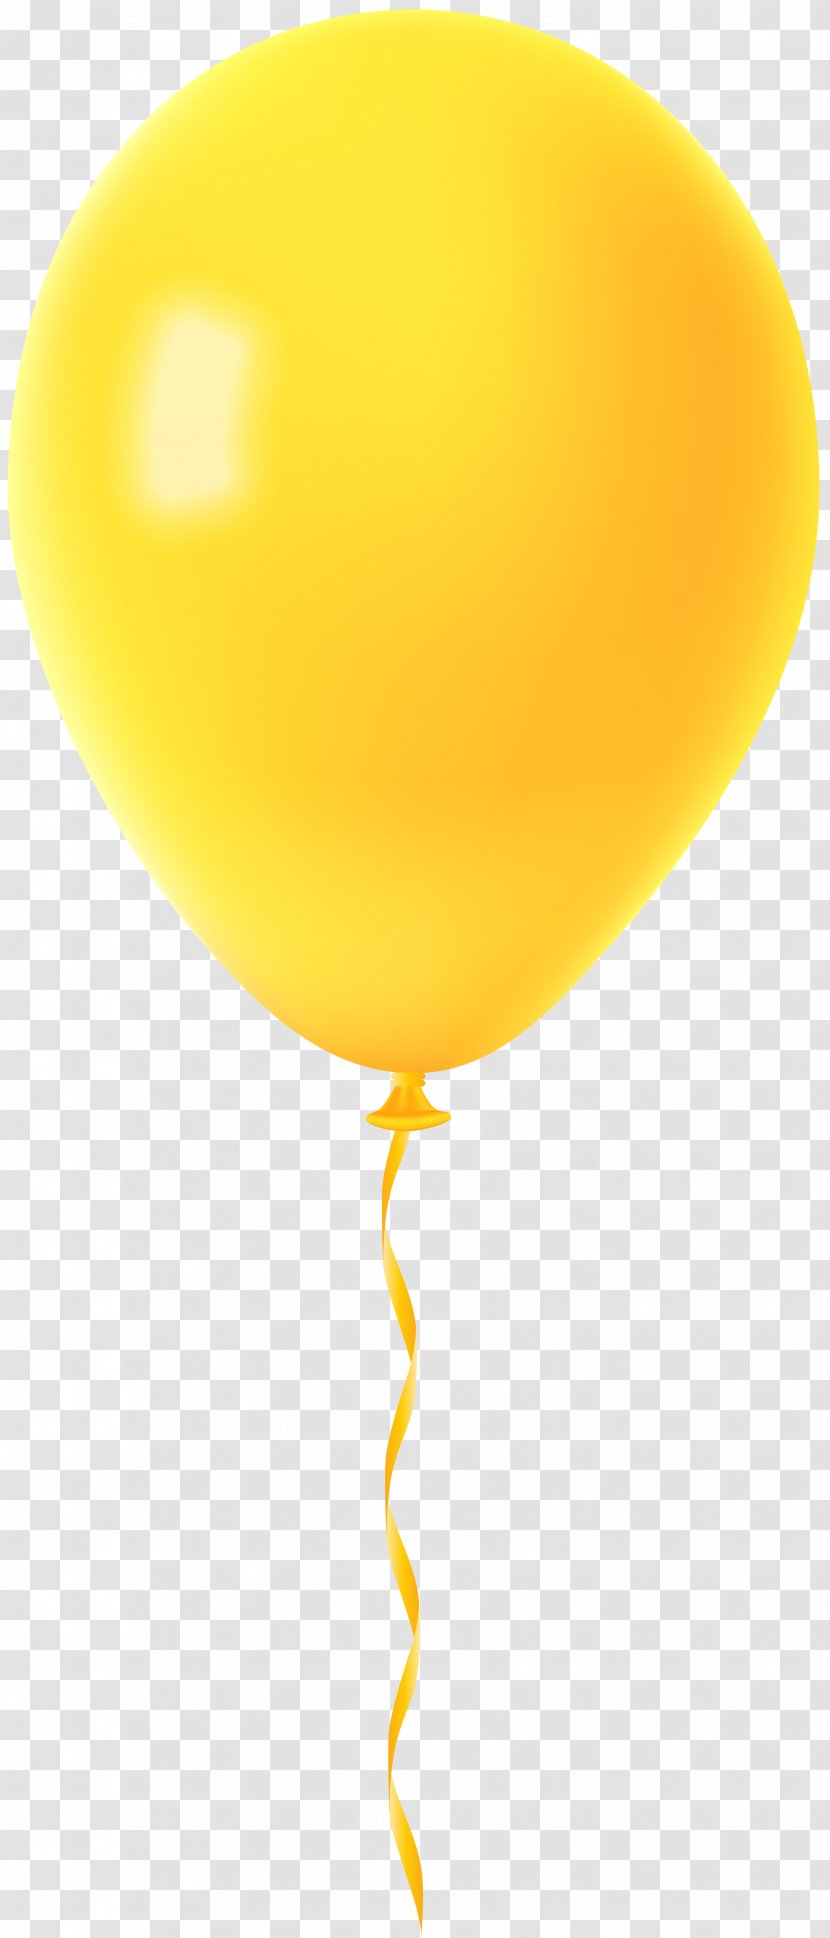 Balloon Morea Bowling & Park Gift Latex Inch - Gold Transparent PNG